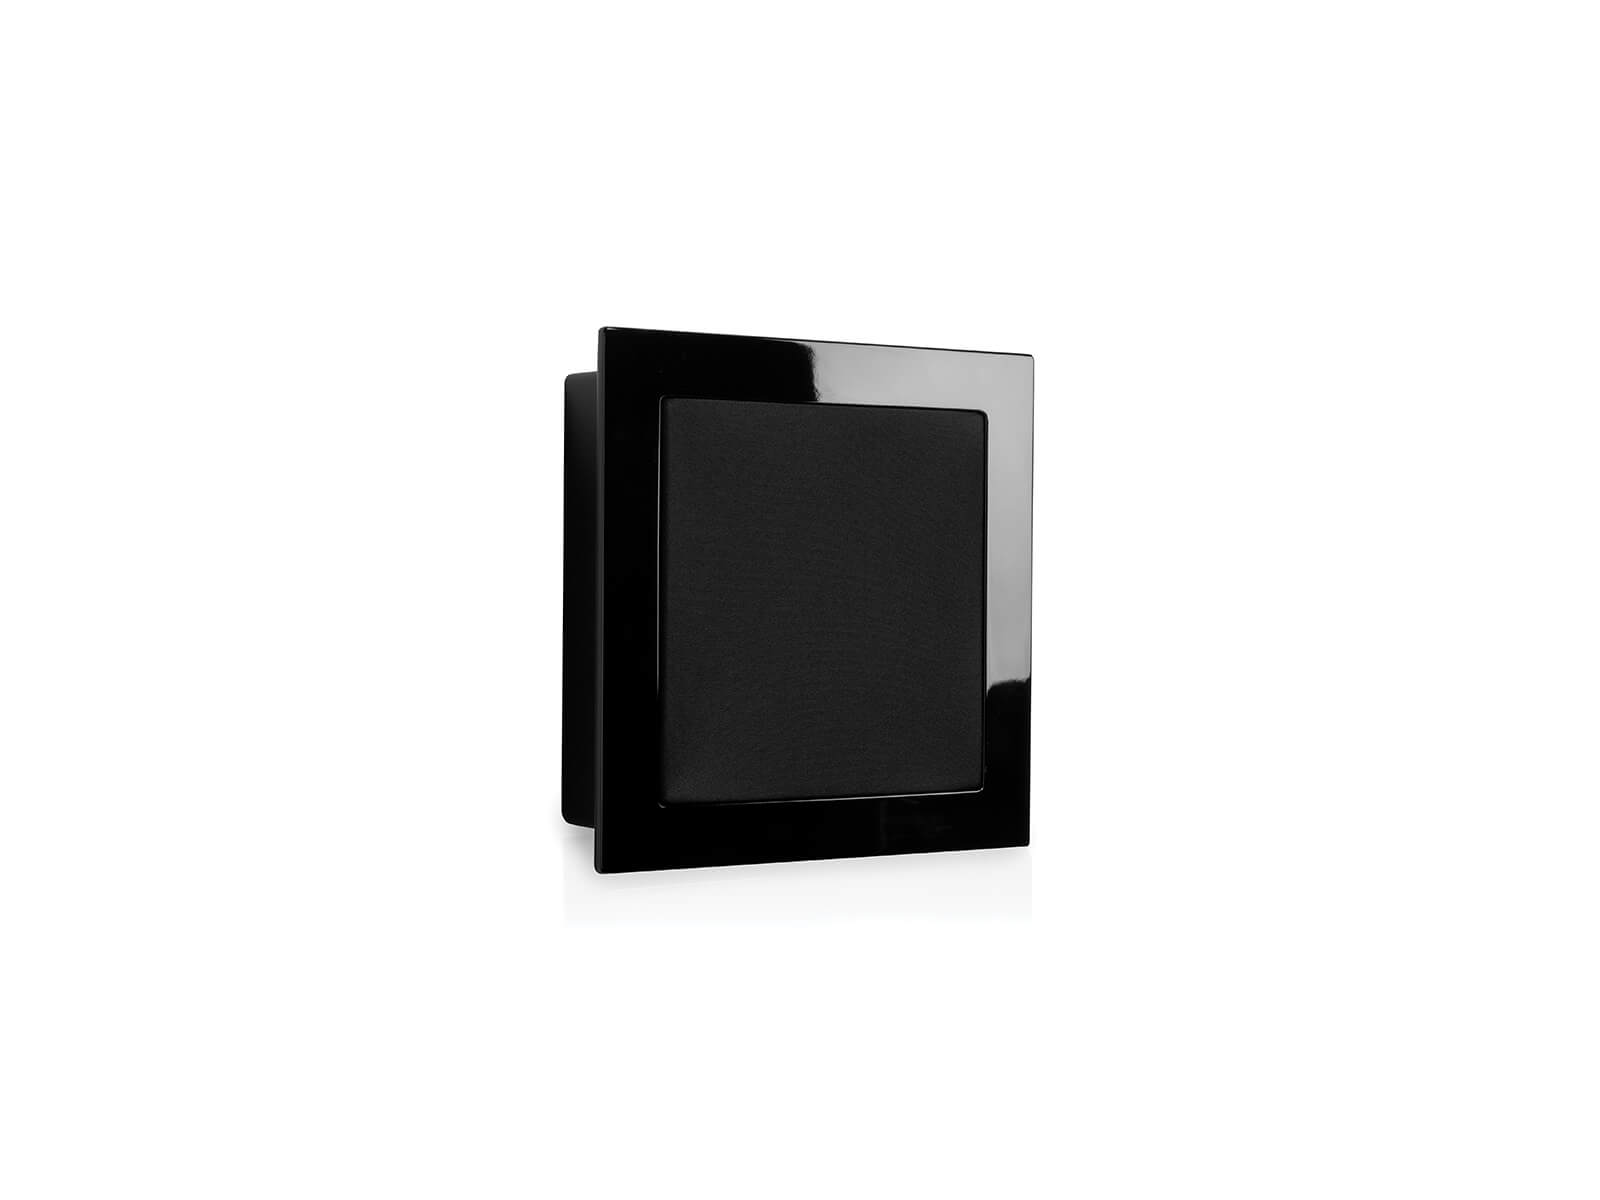 SoundFrame SF3, on-wall speakers, with a high gloss black lacquer finish.